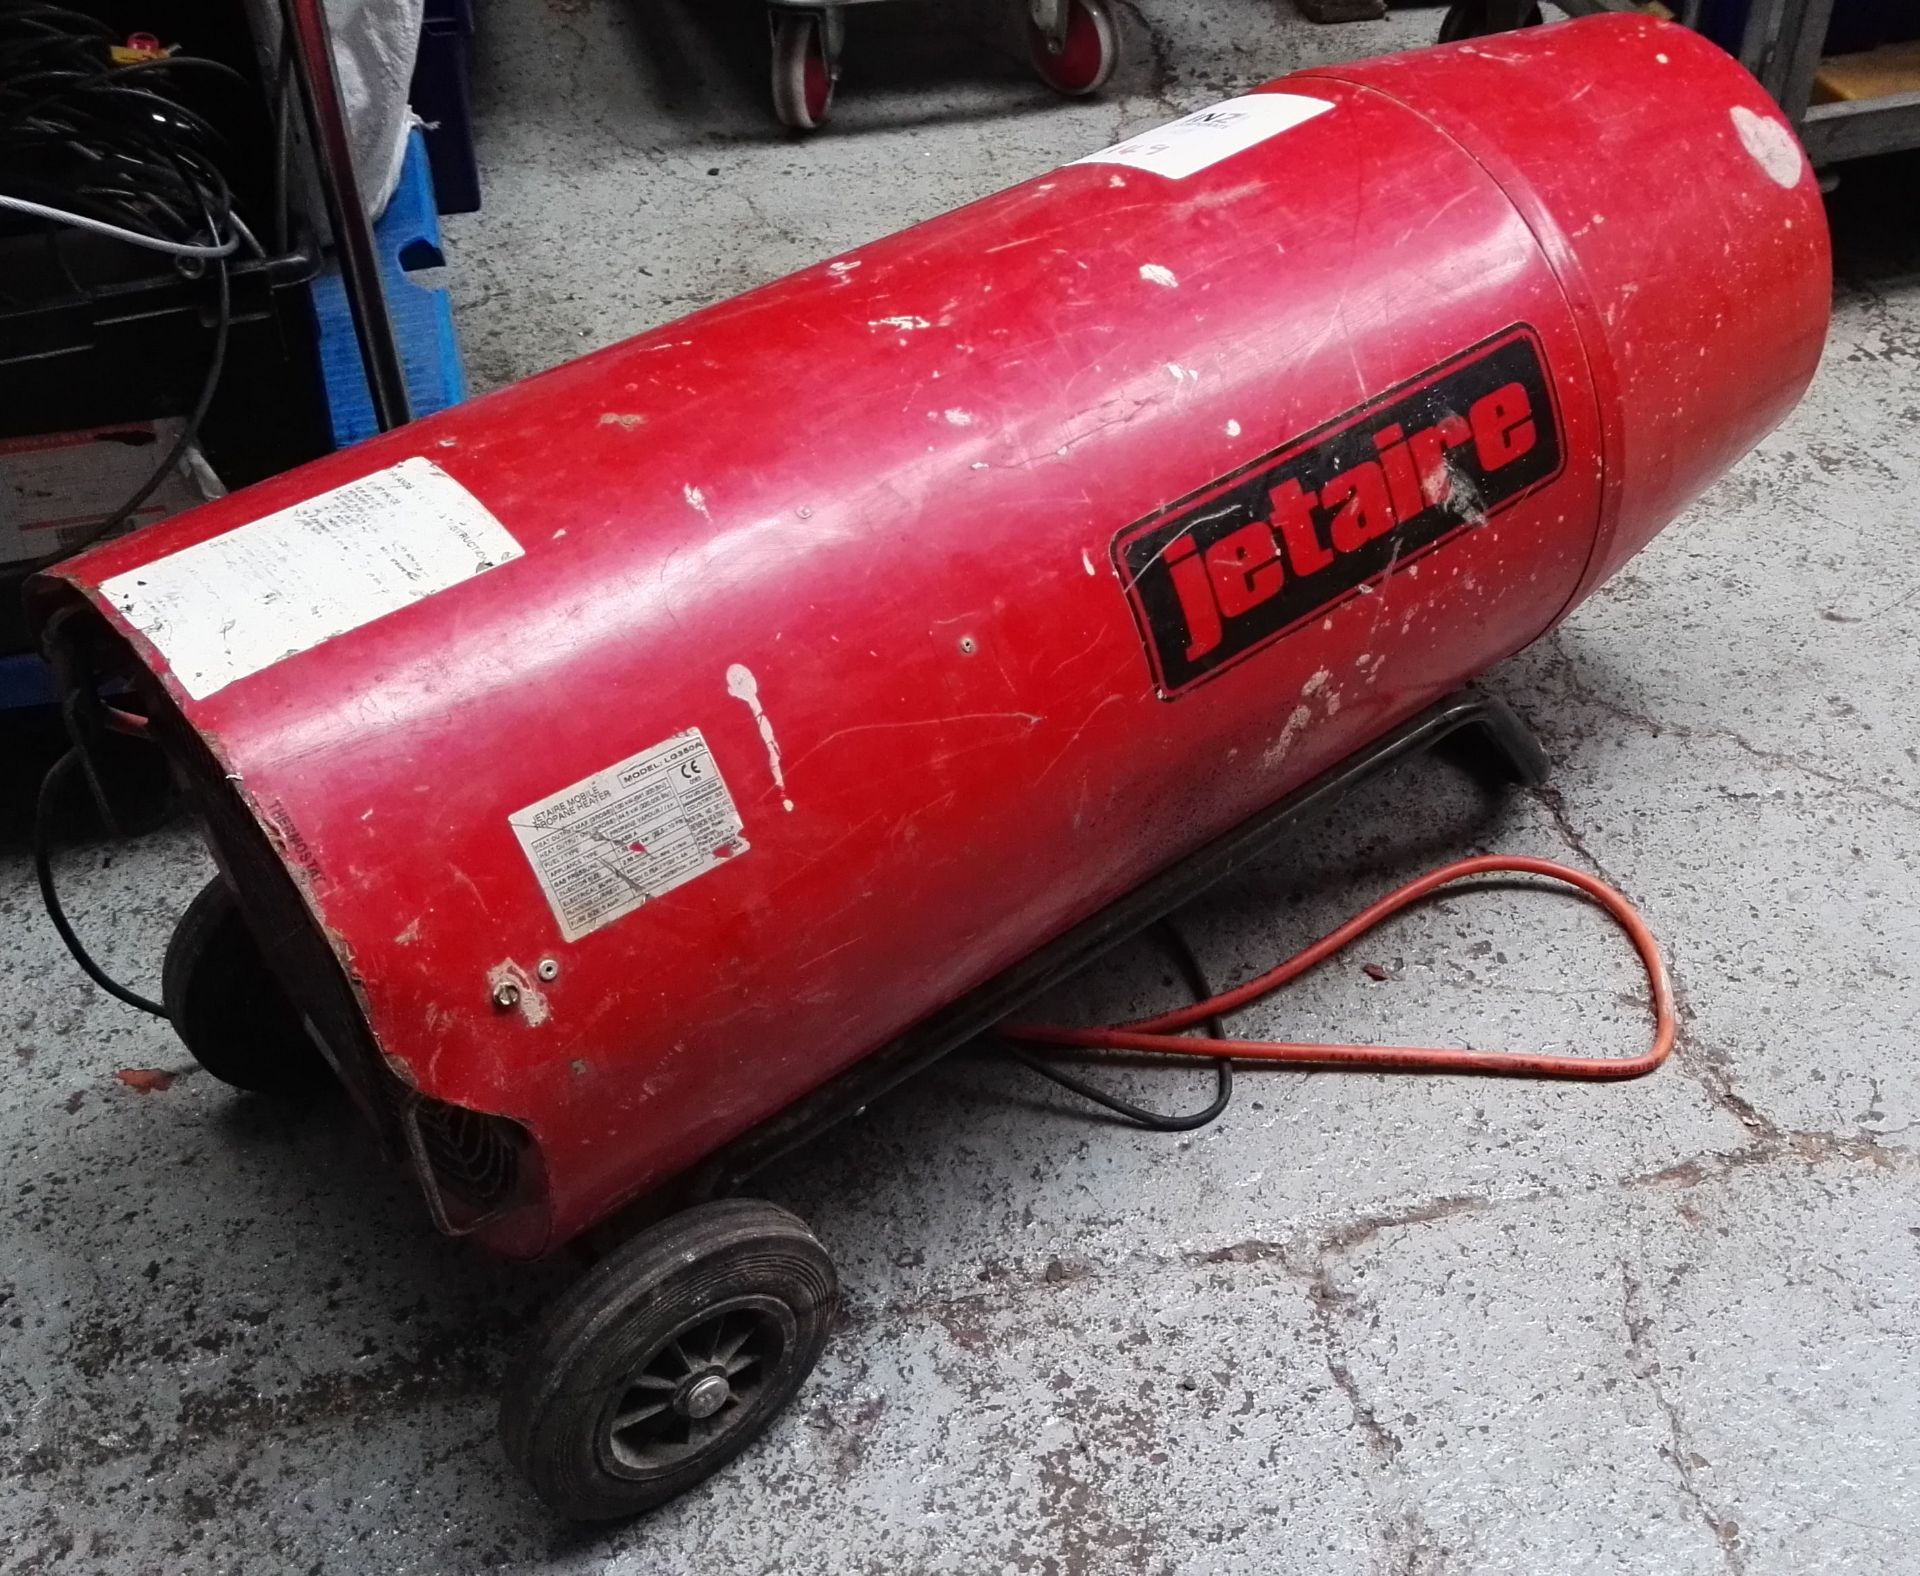 1 x Jetaire LG350A 100kW Mobile Propane Heater - CL011 - Location: Altrincham WA14 Removed from a wo - Image 15 of 16